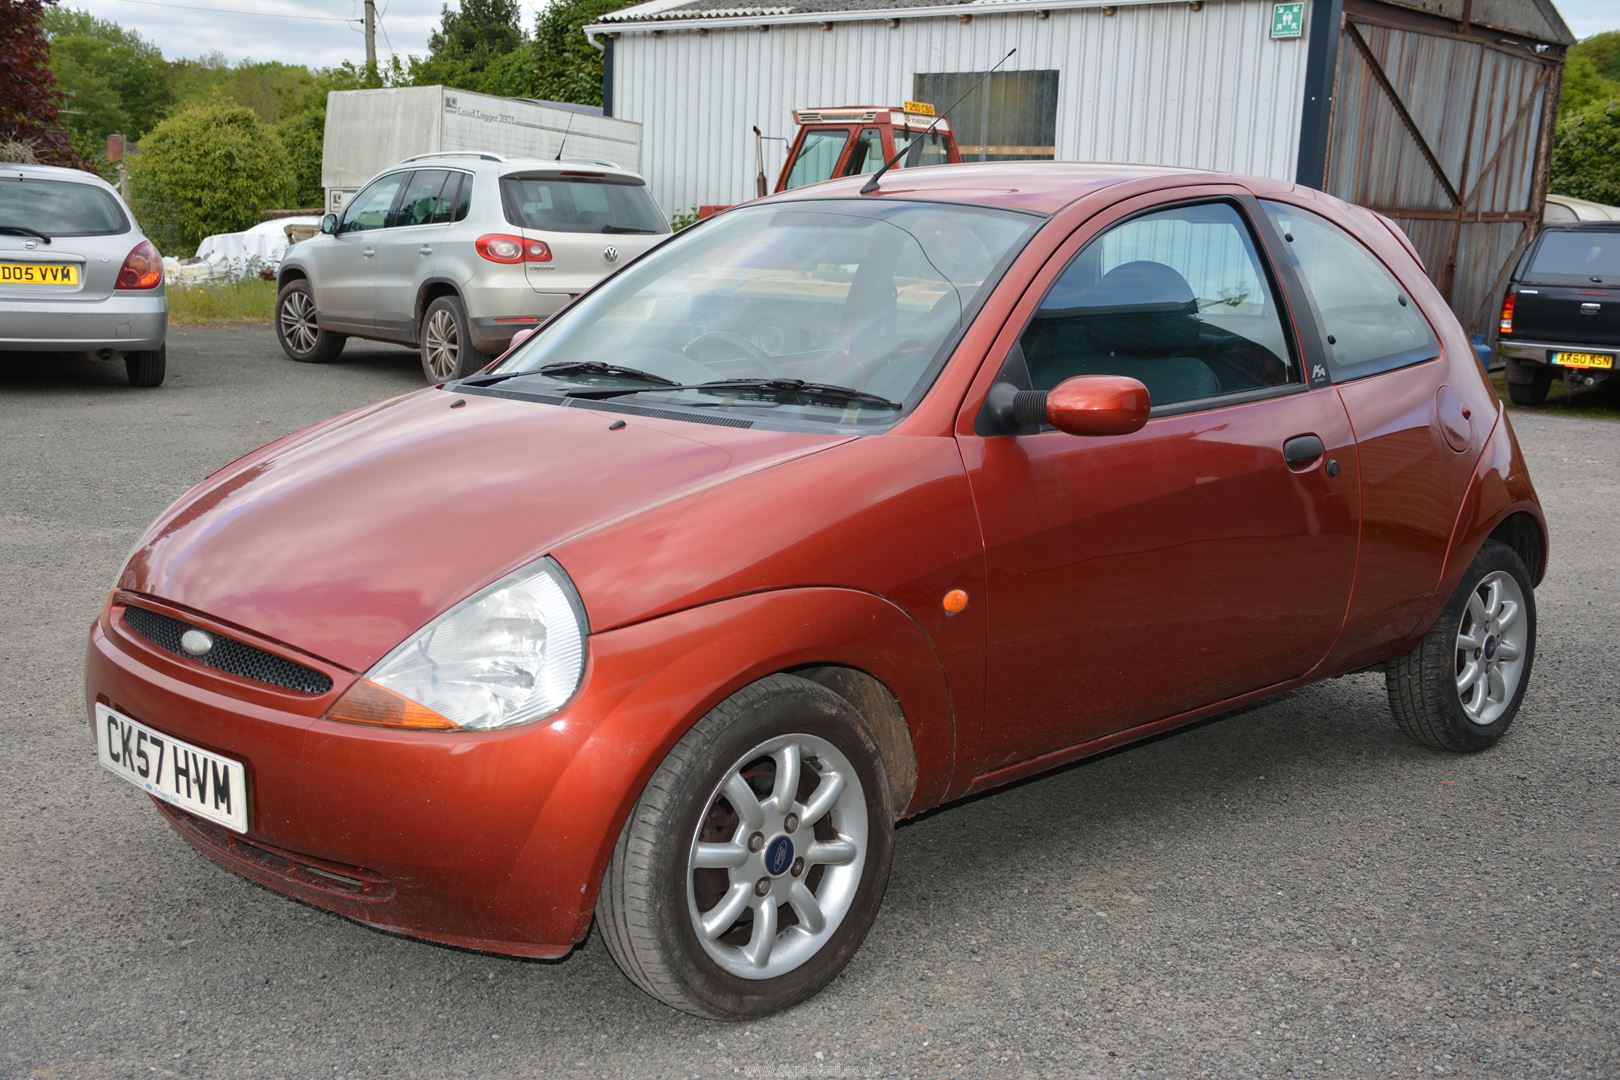 A Ford KA Zetec Climate 1299cc petrol-engined three door hatchback motor Car finished in red, - Image 3 of 14